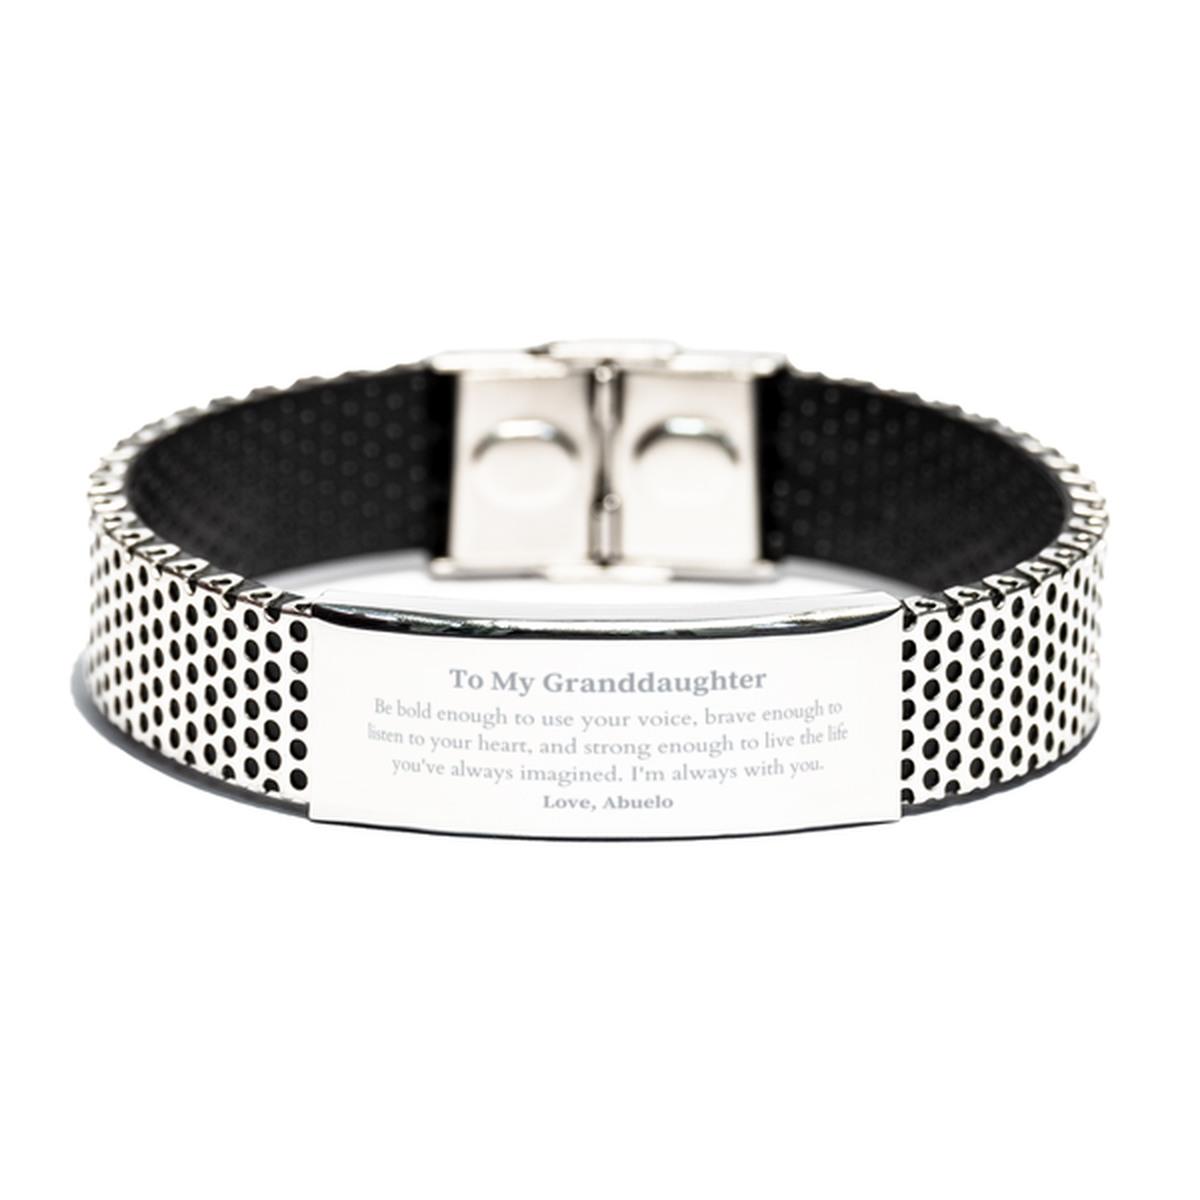 Keepsake Granddaughter Stainless Steel Bracelet Gift Idea Graduation Christmas Birthday Granddaughter from Abuelo, Granddaughter Be bold enough to use your voice, brave enough to listen to your heart. Love, Abuelo